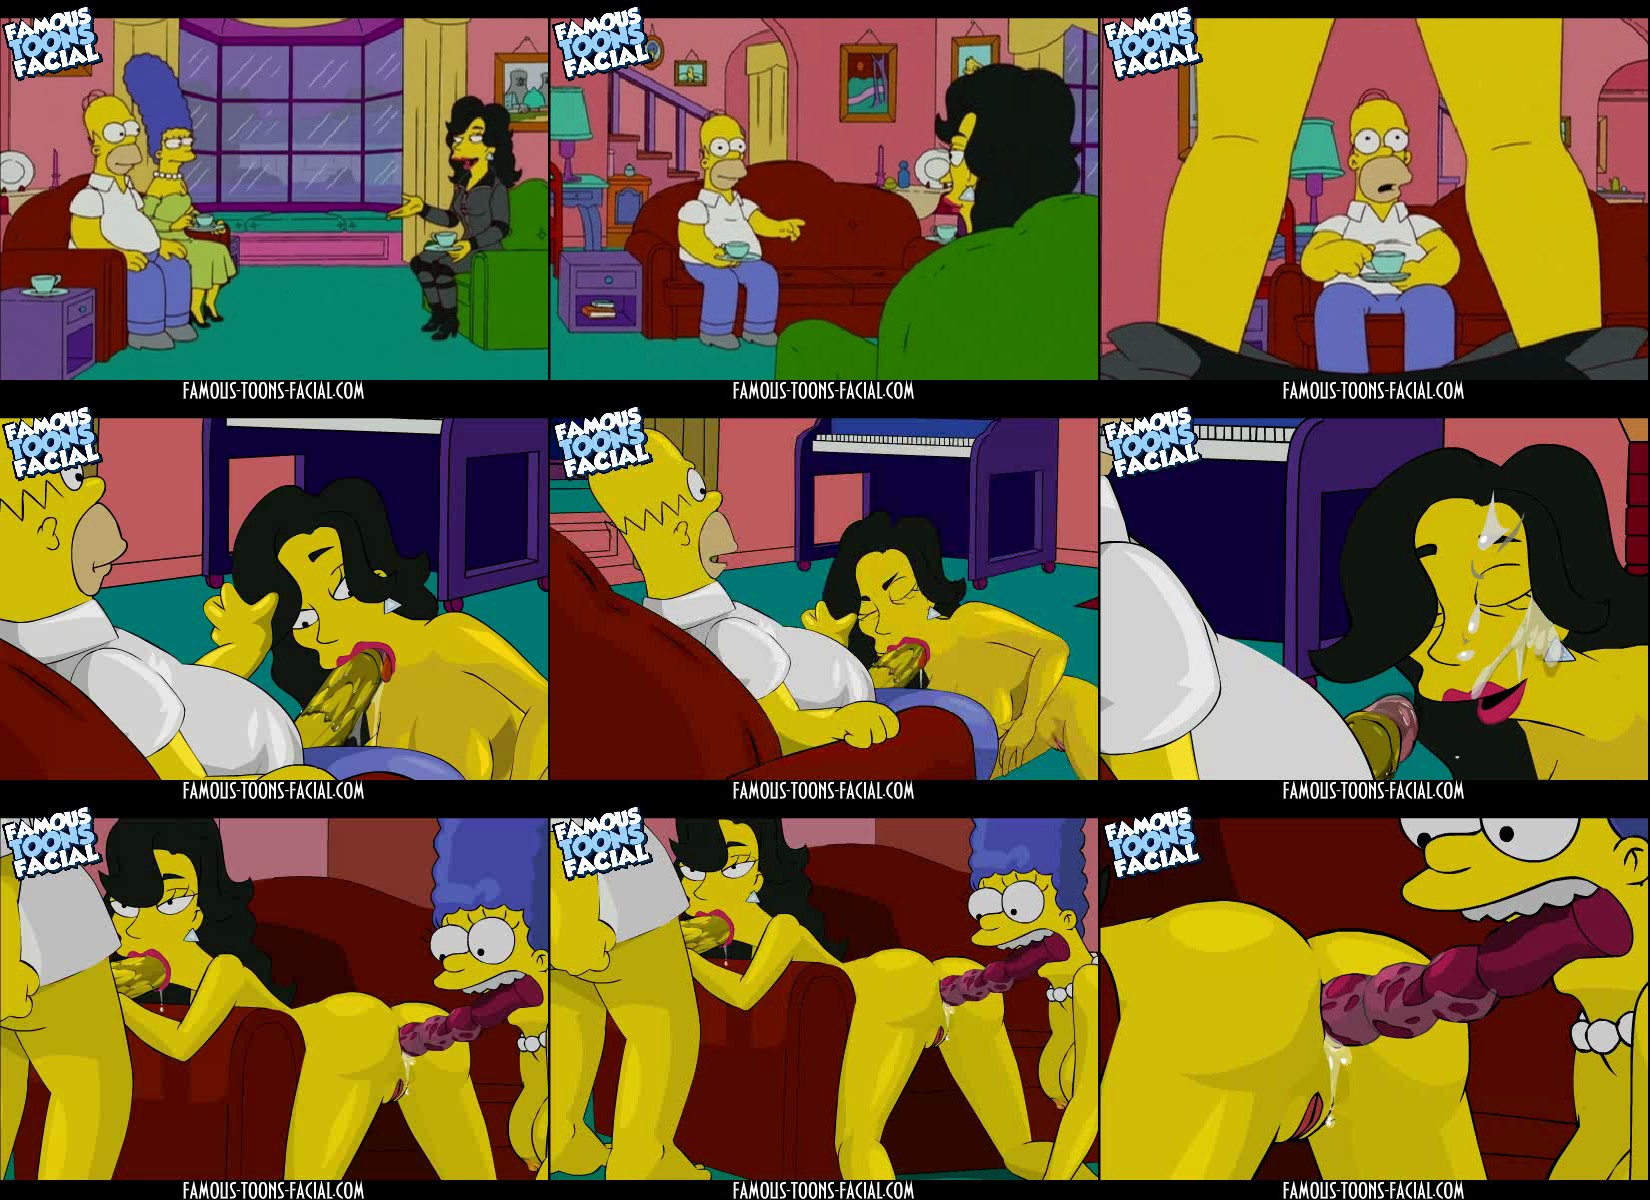 Marge_Simpson_and_Property_Agent_in_Threesome_Sex_Simpsons_Video__s.jpg